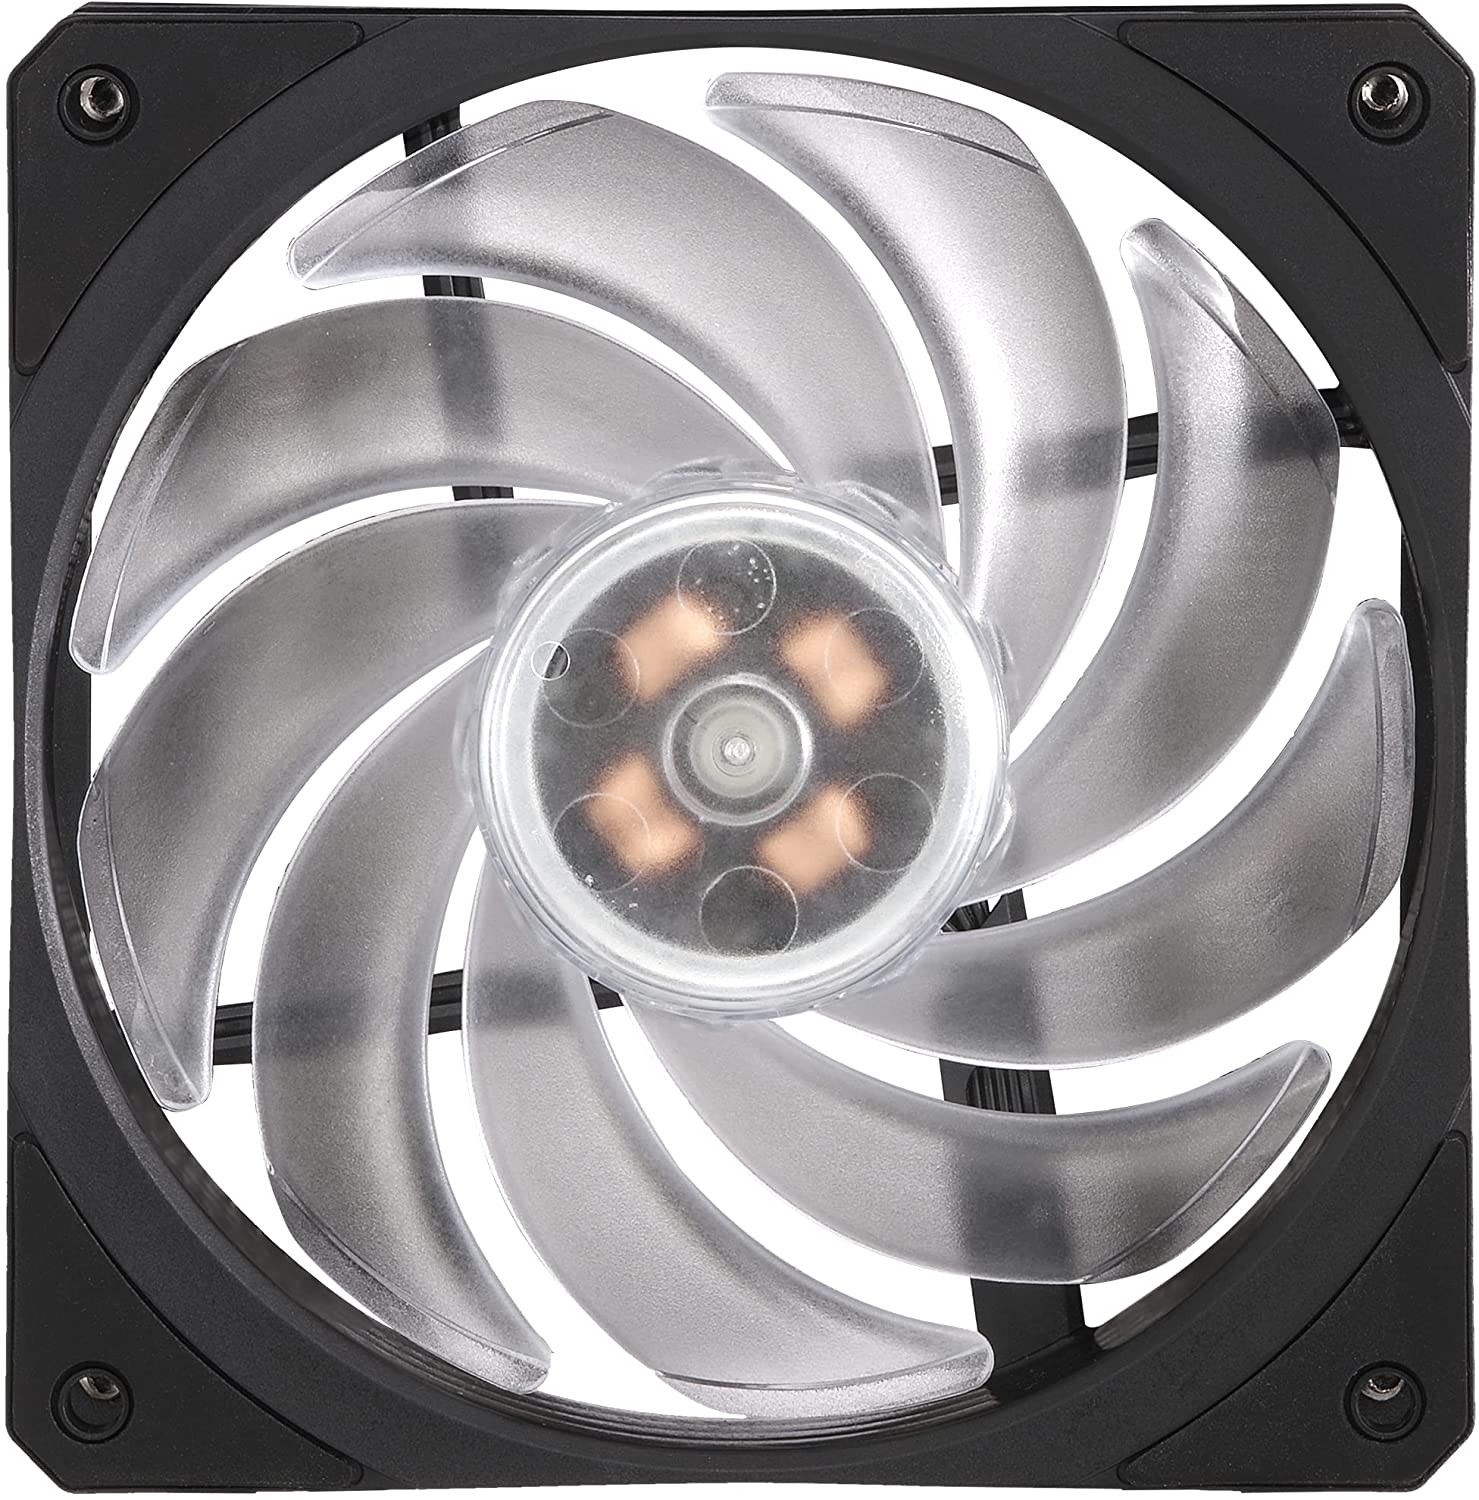 Cooler Master Hyper 212 Black Edition RGB CPU Air Cooler, SF120R RGB Fan, Anodized Gun-Metal Black, Brushed Nickel Fins, 4 Copper Direct Contact Heat Pipes...